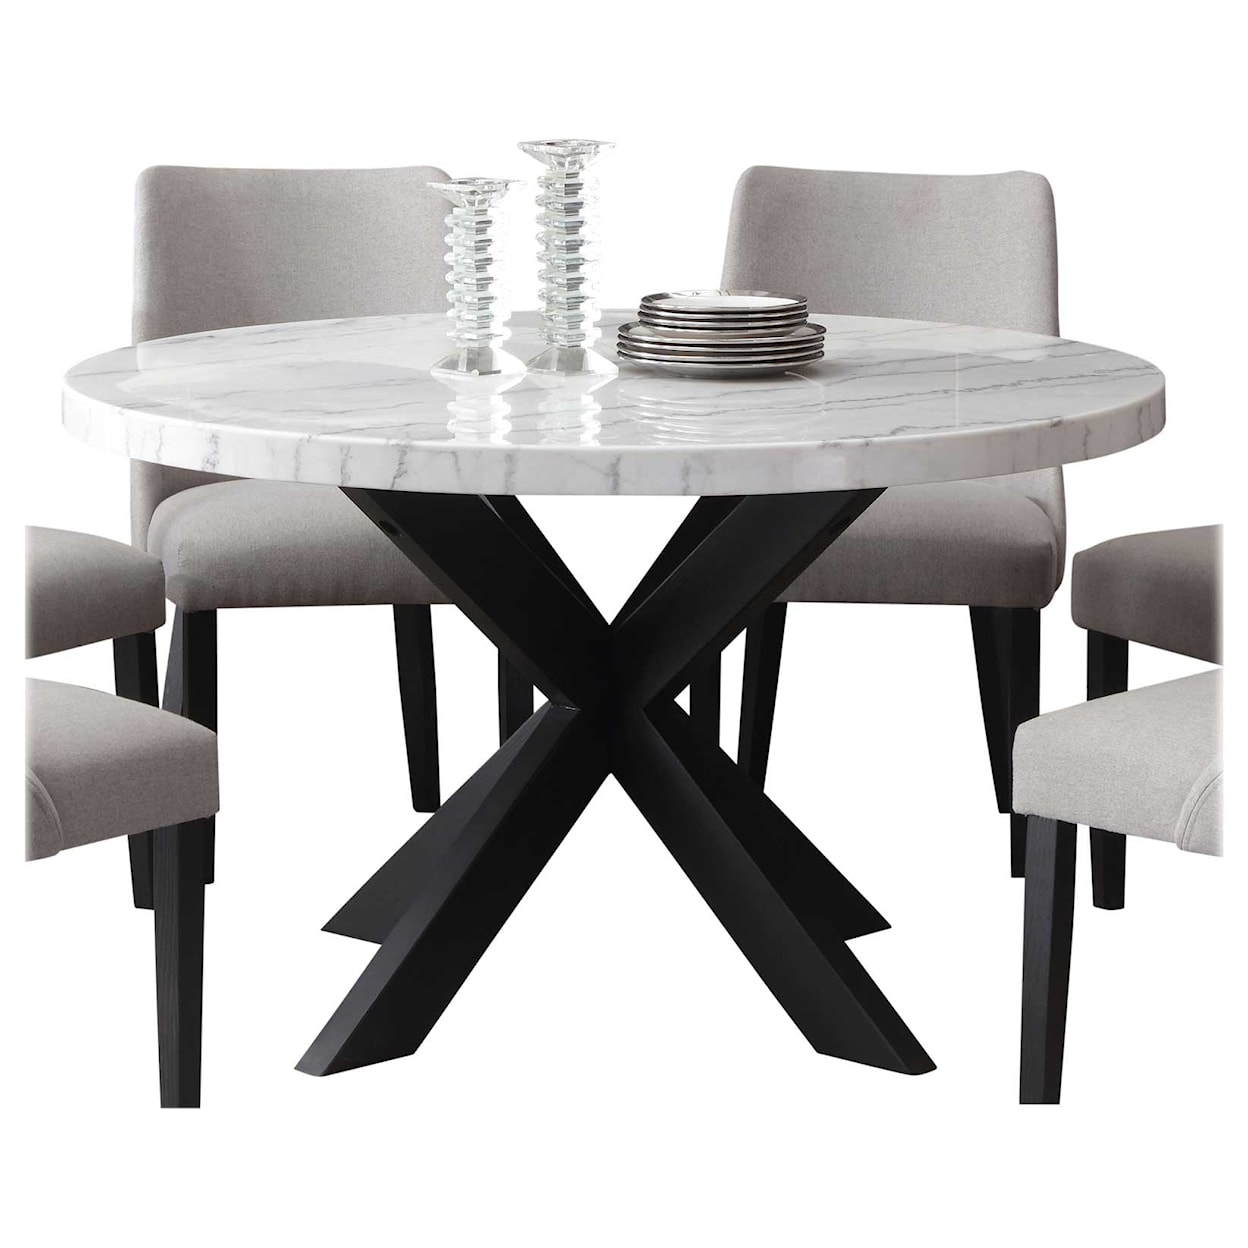 Steve Silver Xena 52-inch Round Dining Table